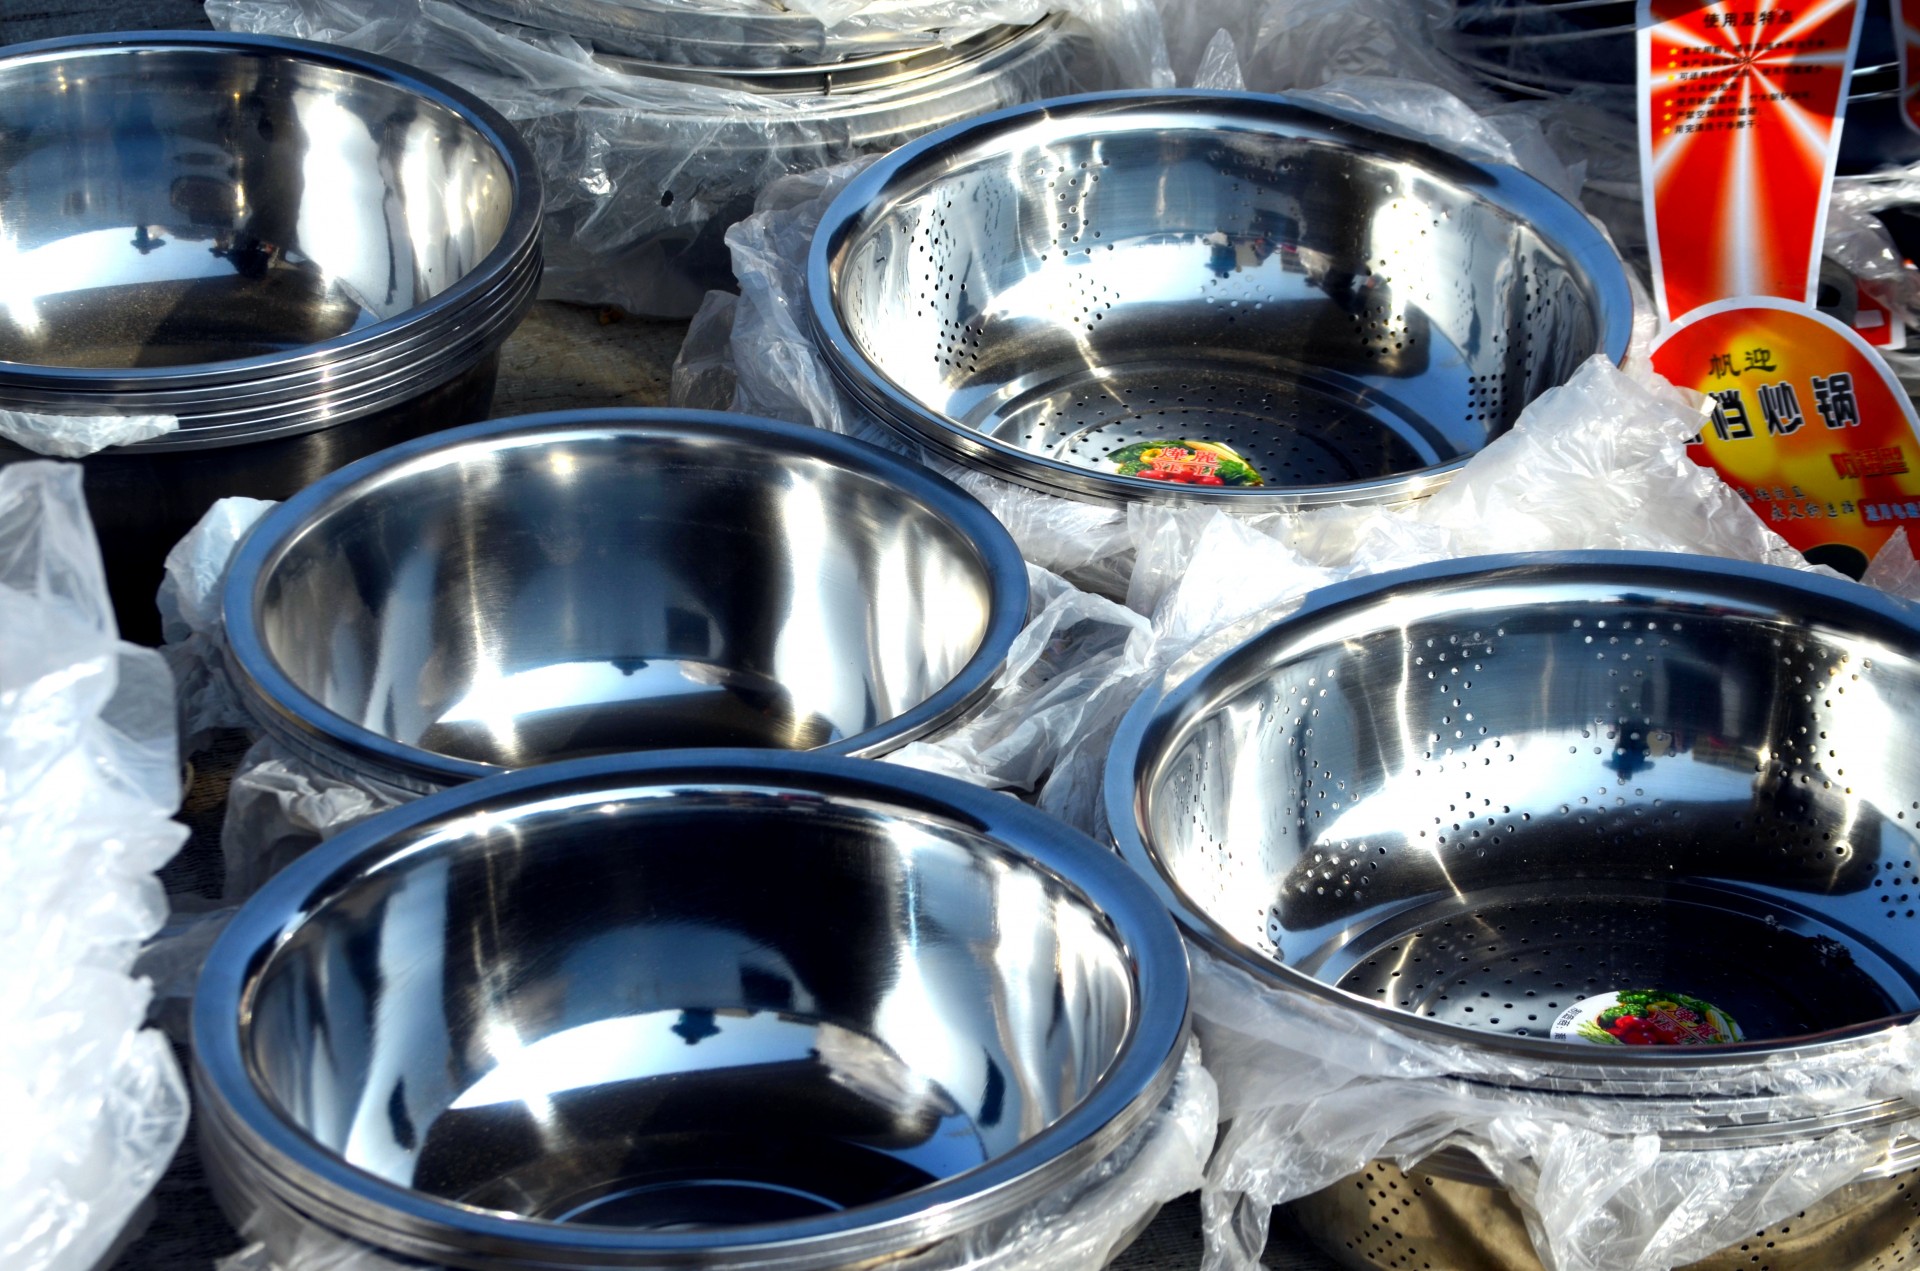 display of stainless bowls